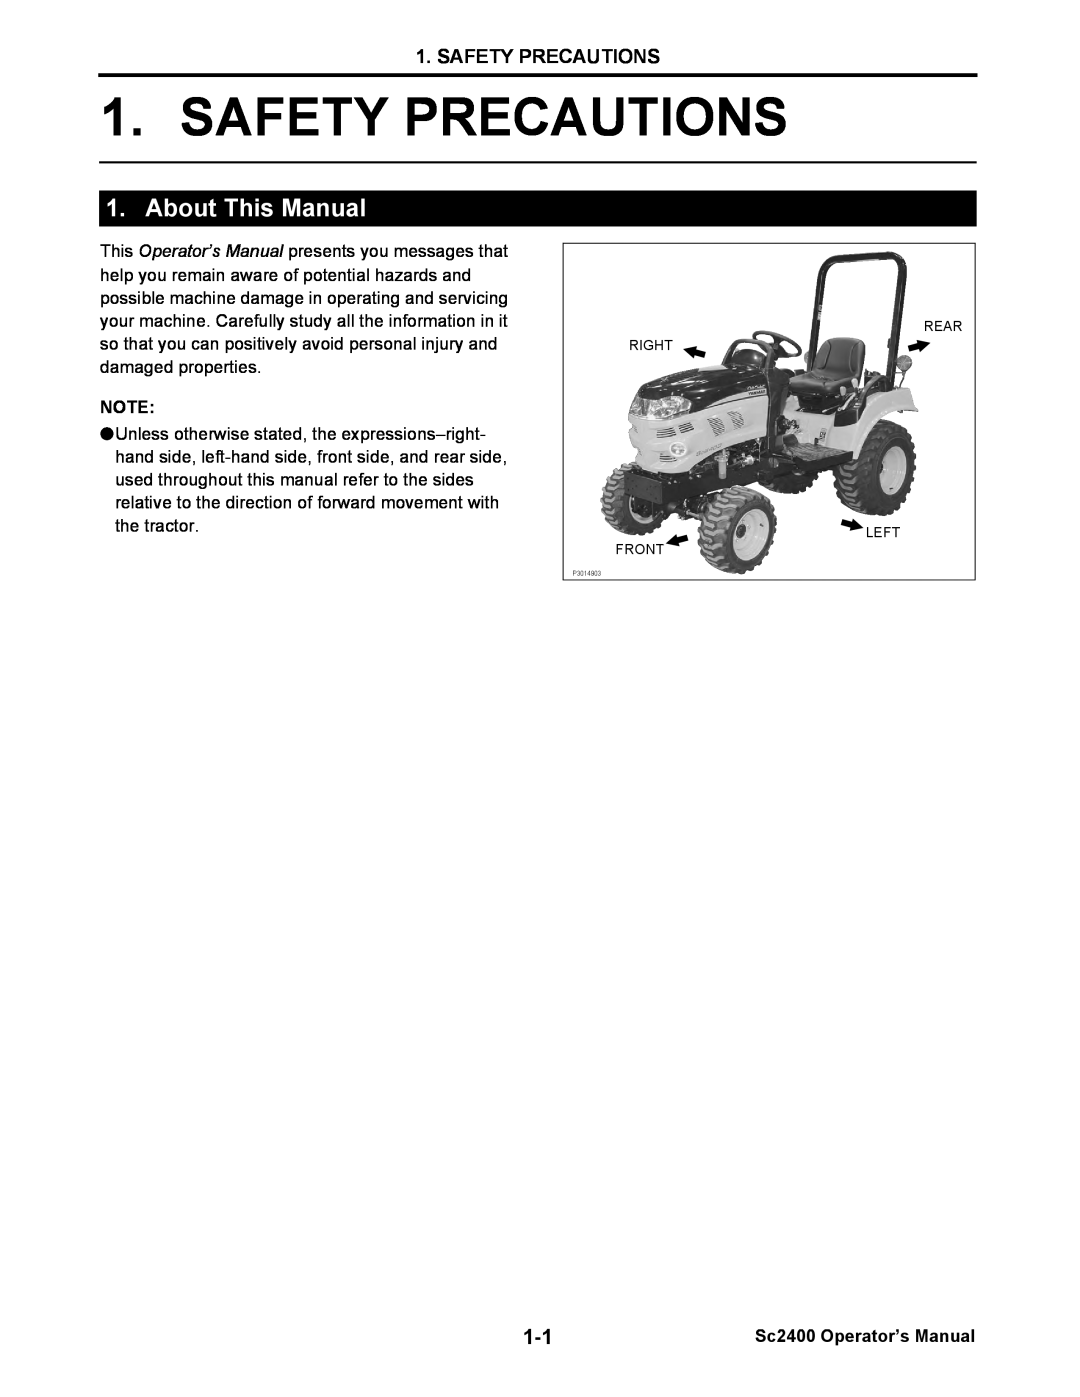 Cub Cadet SC2400 manual Safety Precautions, About This Manual, Sc2400 Operator’s Manual 